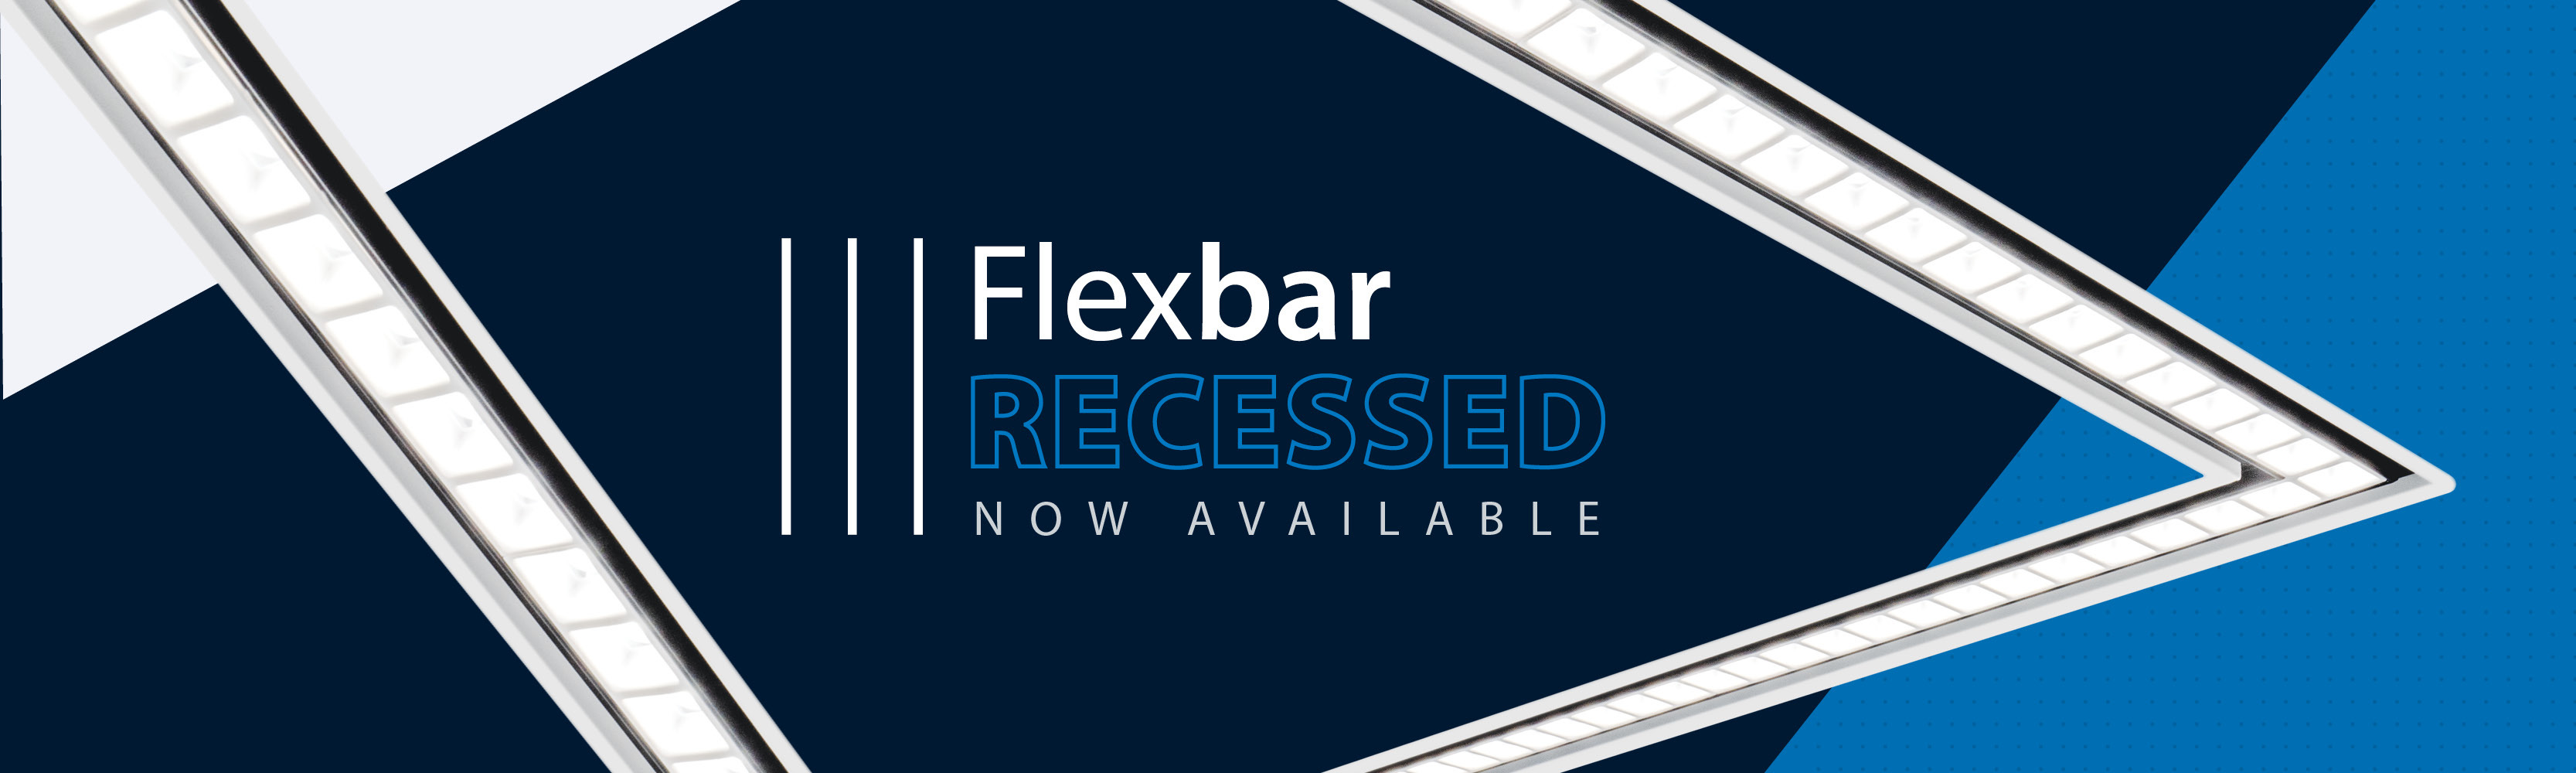 Flexbar - Now available as recessed!